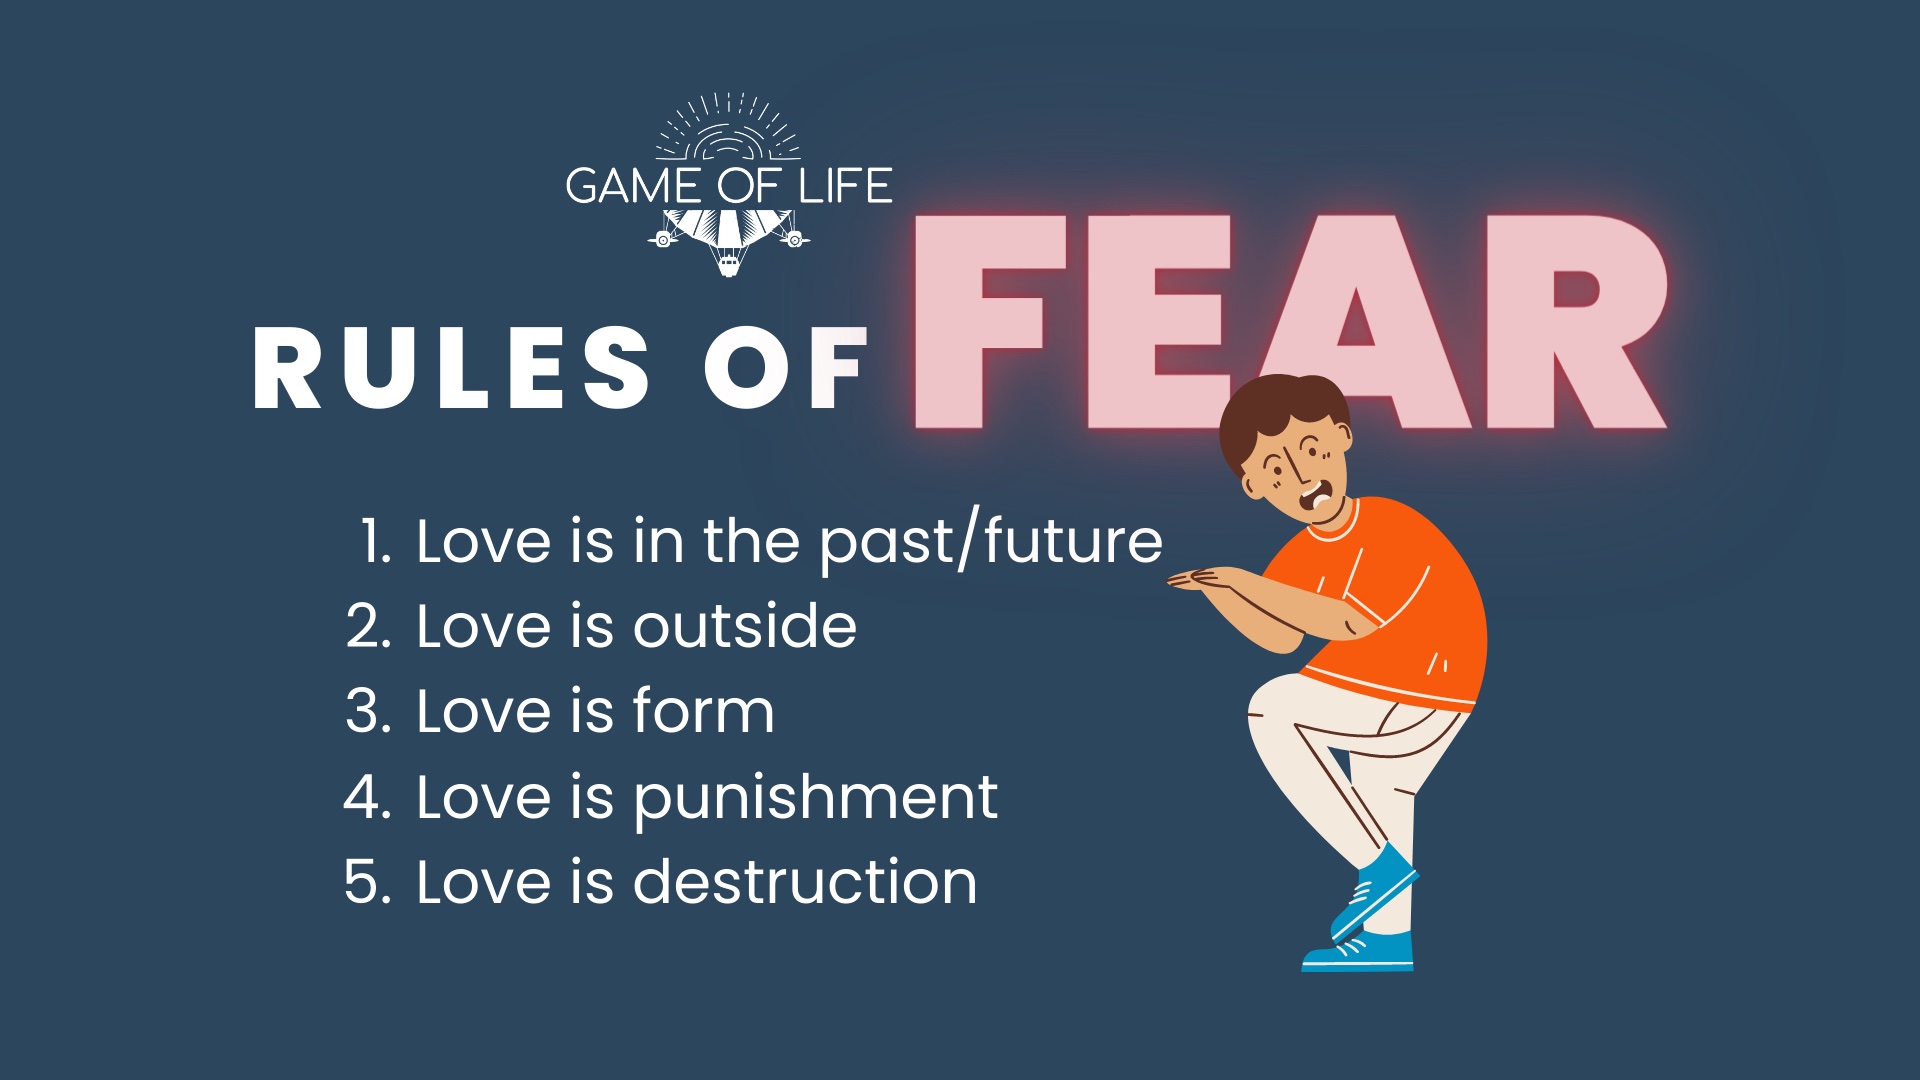 The Rules of fear in the NLP game of life